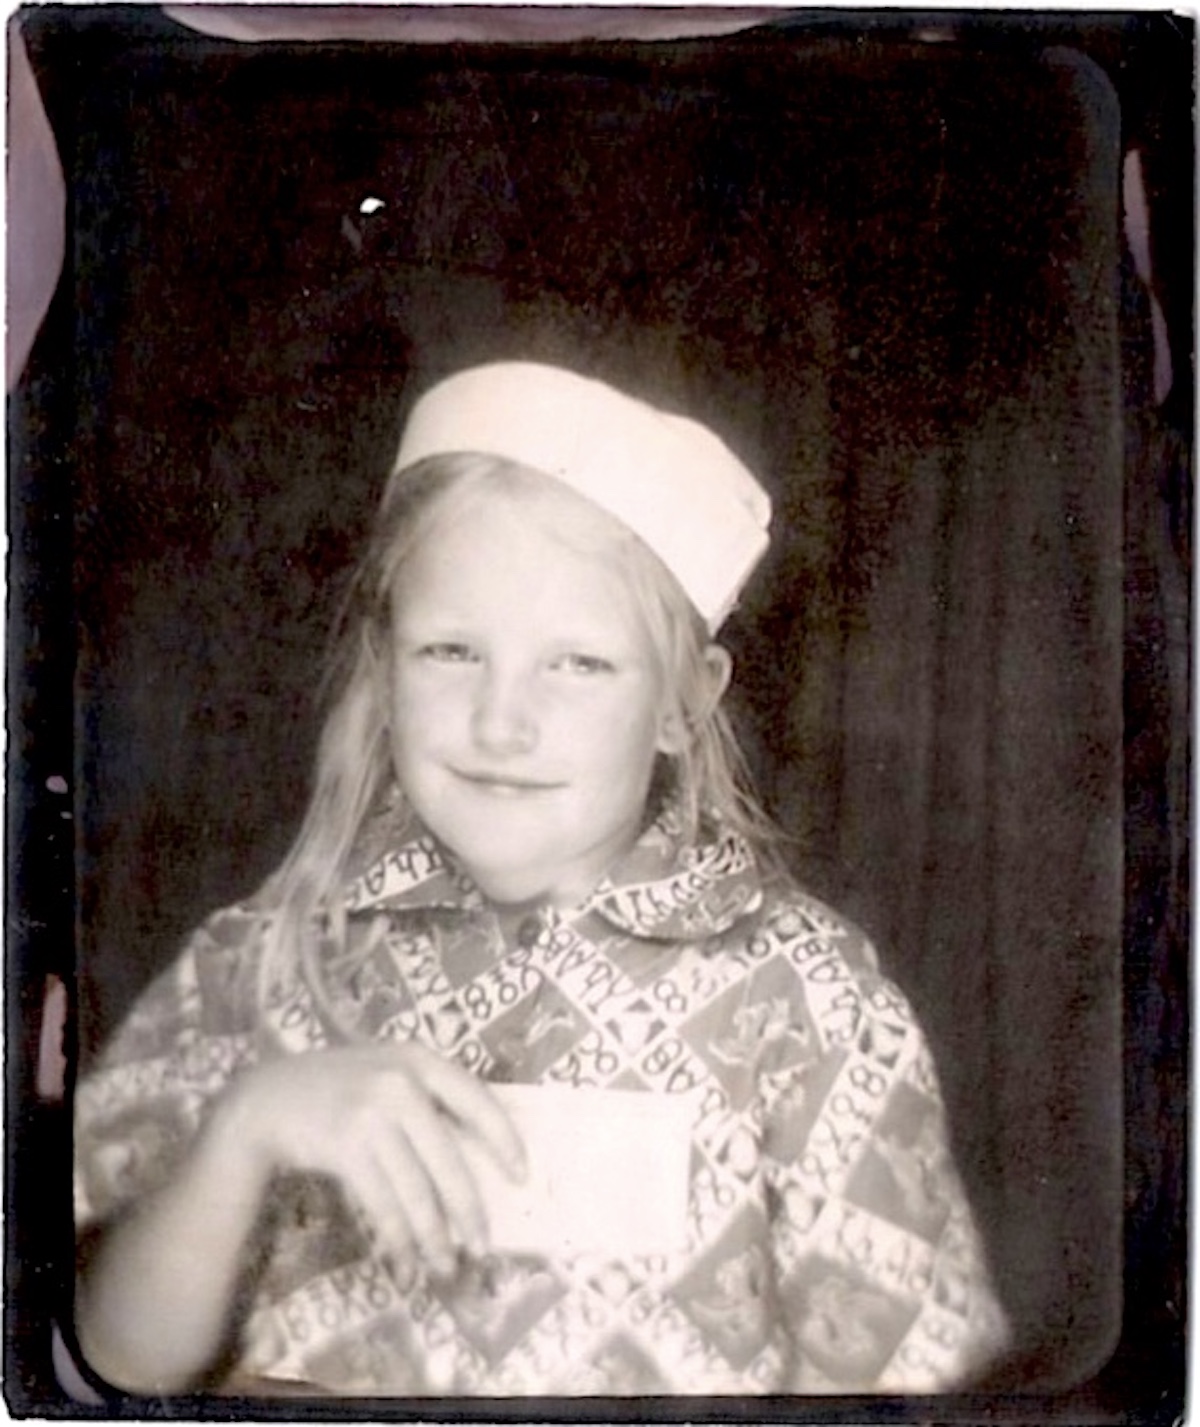 Susan at age 10 in a sailor hat. Photo courtesy of Susan Griffin.